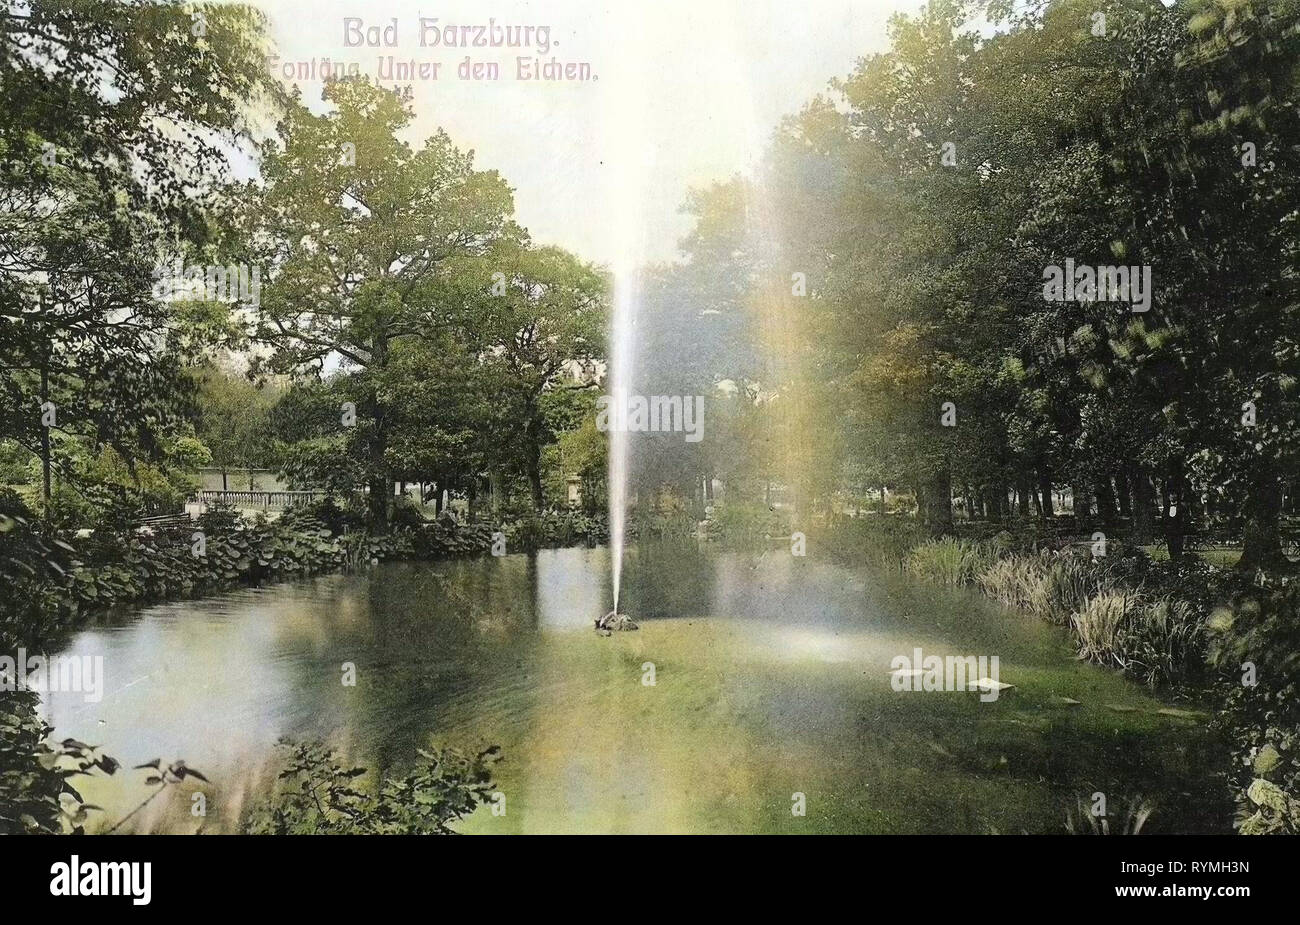 Fountains in Bad Harzburg, Ponds in Lower Saxony, 1908, Lower Saxony, Bad Harzburg, Fontäne unter den Eichen, Germany Stock Photo